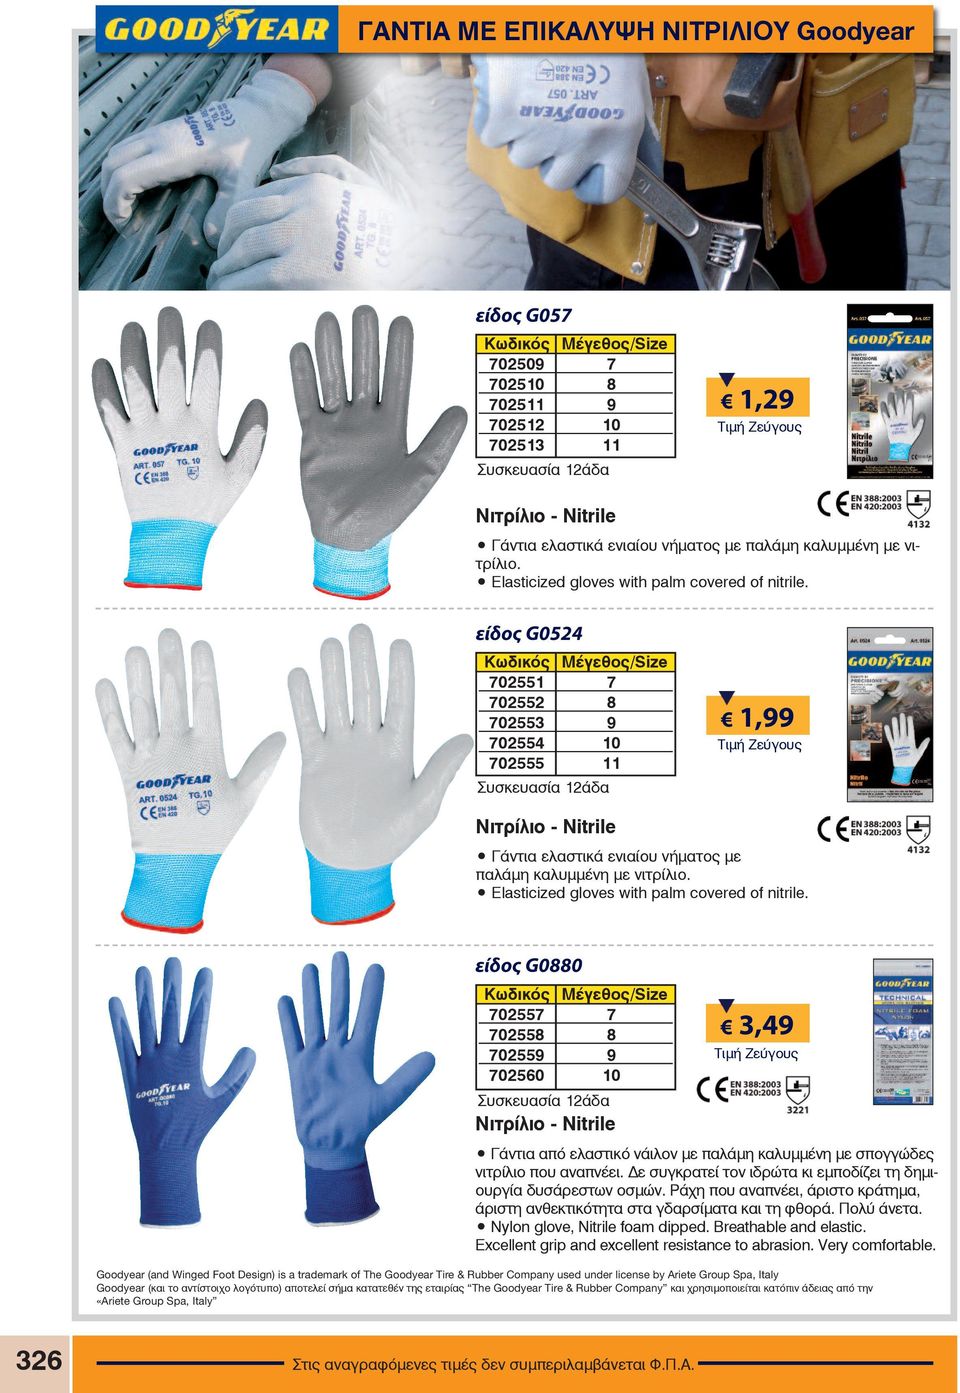 Elasticized gloves with palm covered of nitrile.